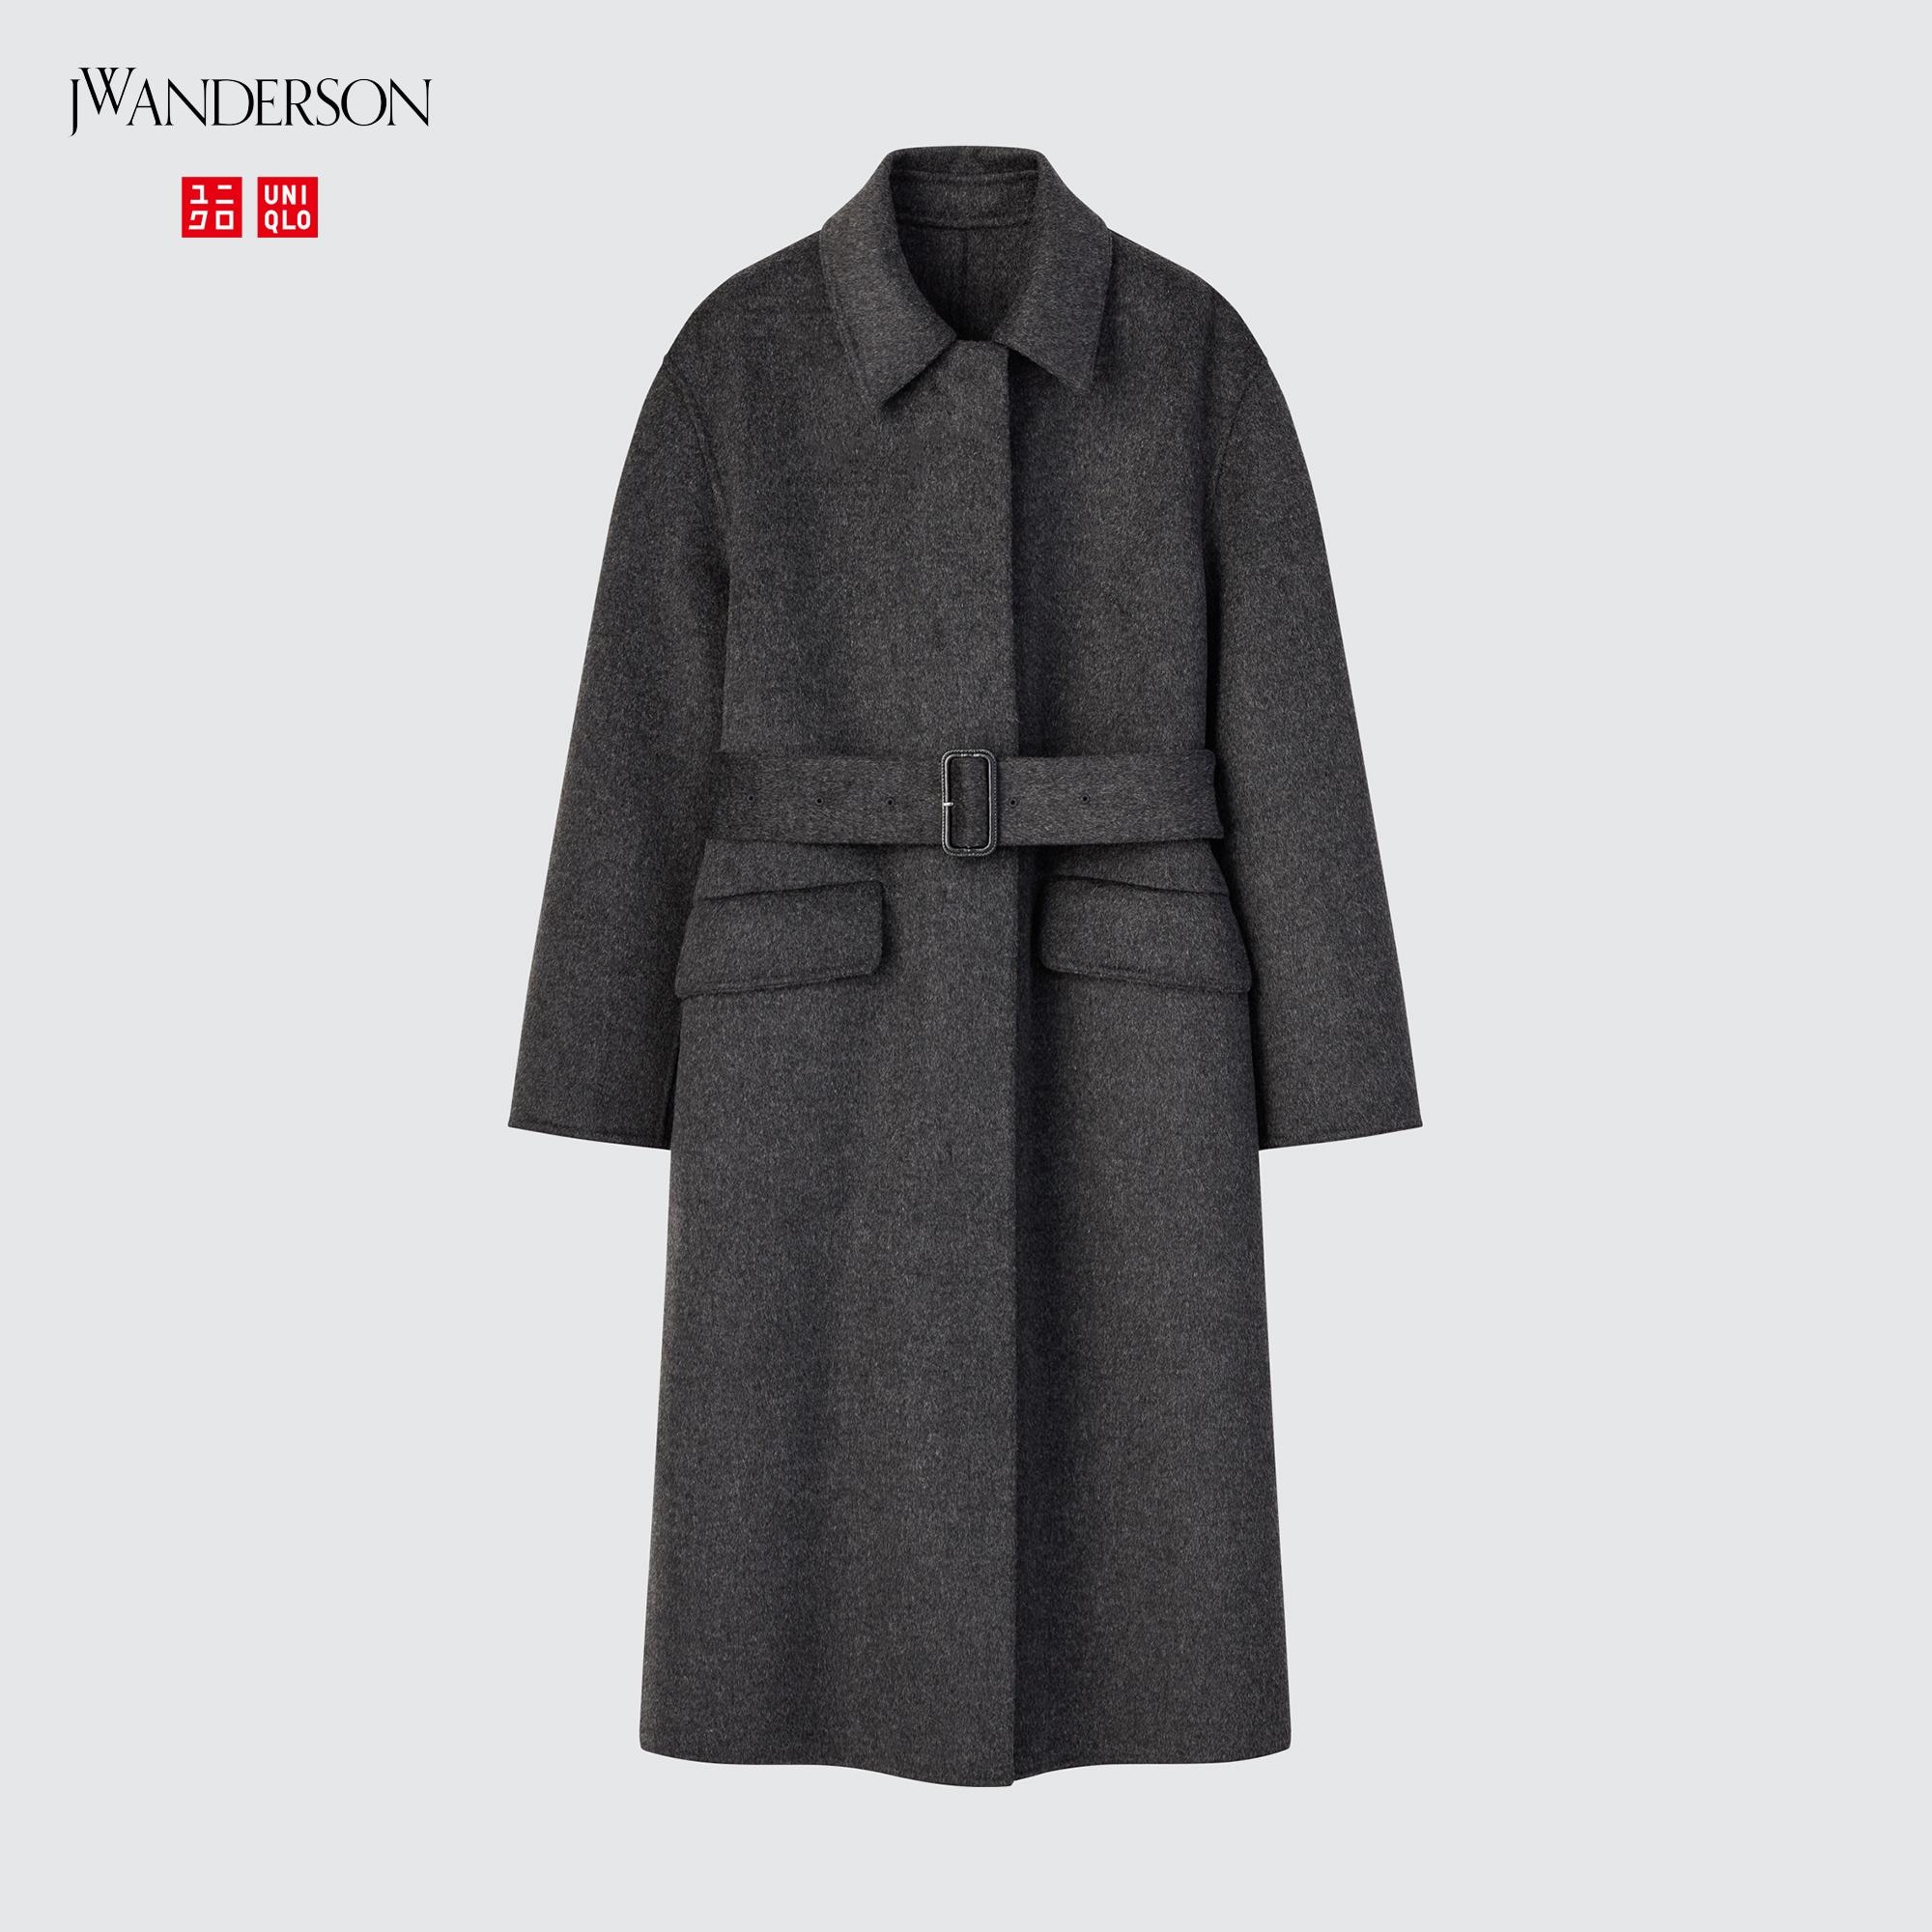 Buy Jw Anderson Coat Uniqlo  UP TO 52 OFF